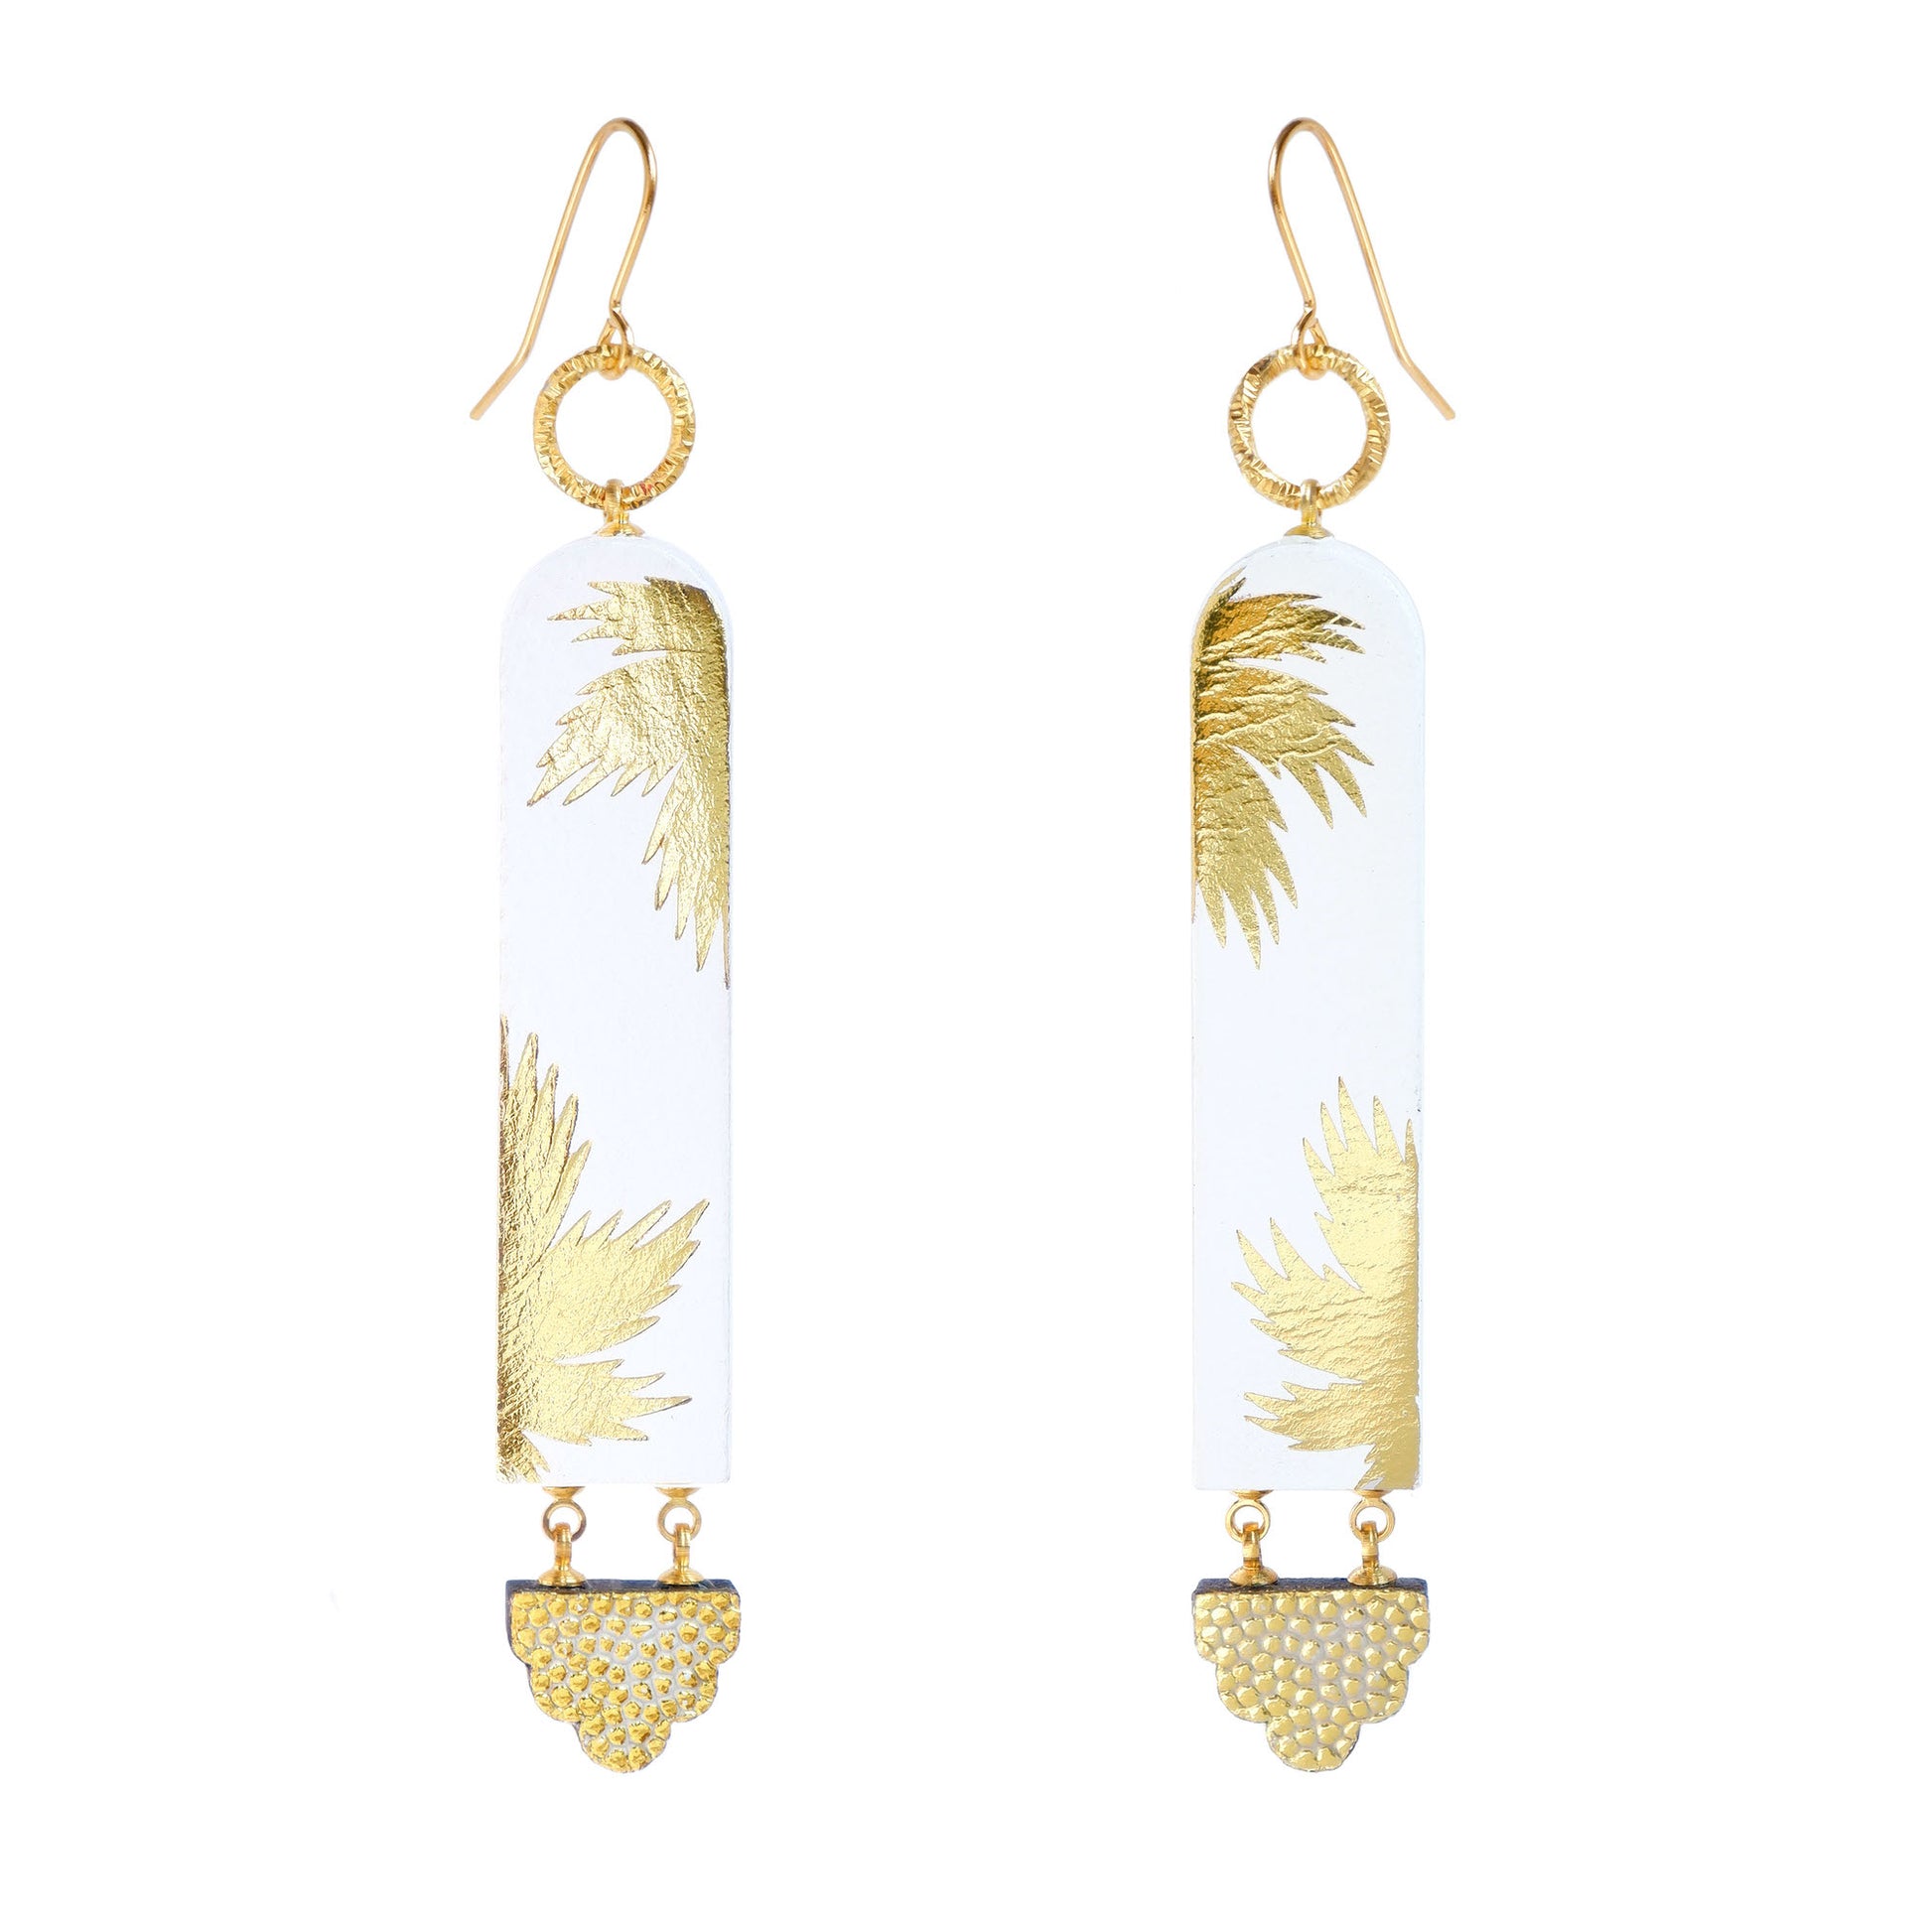 long drop hook earrings - arched strips in white leather, printed with gold palm trees